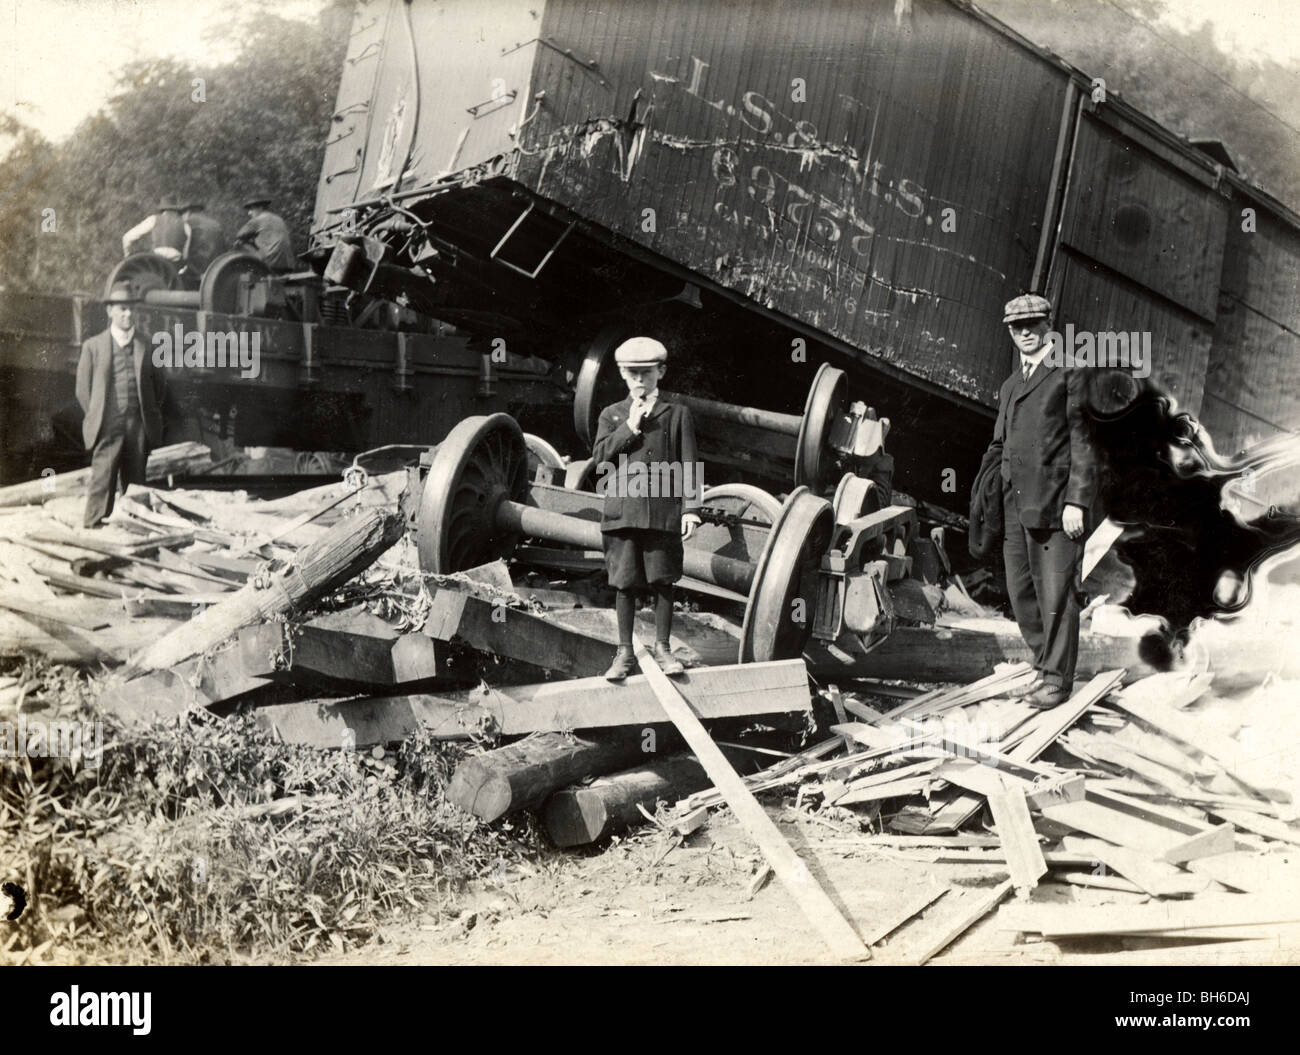 Boy Standing Amidst Wreckage from Train Wreck Stock Photo